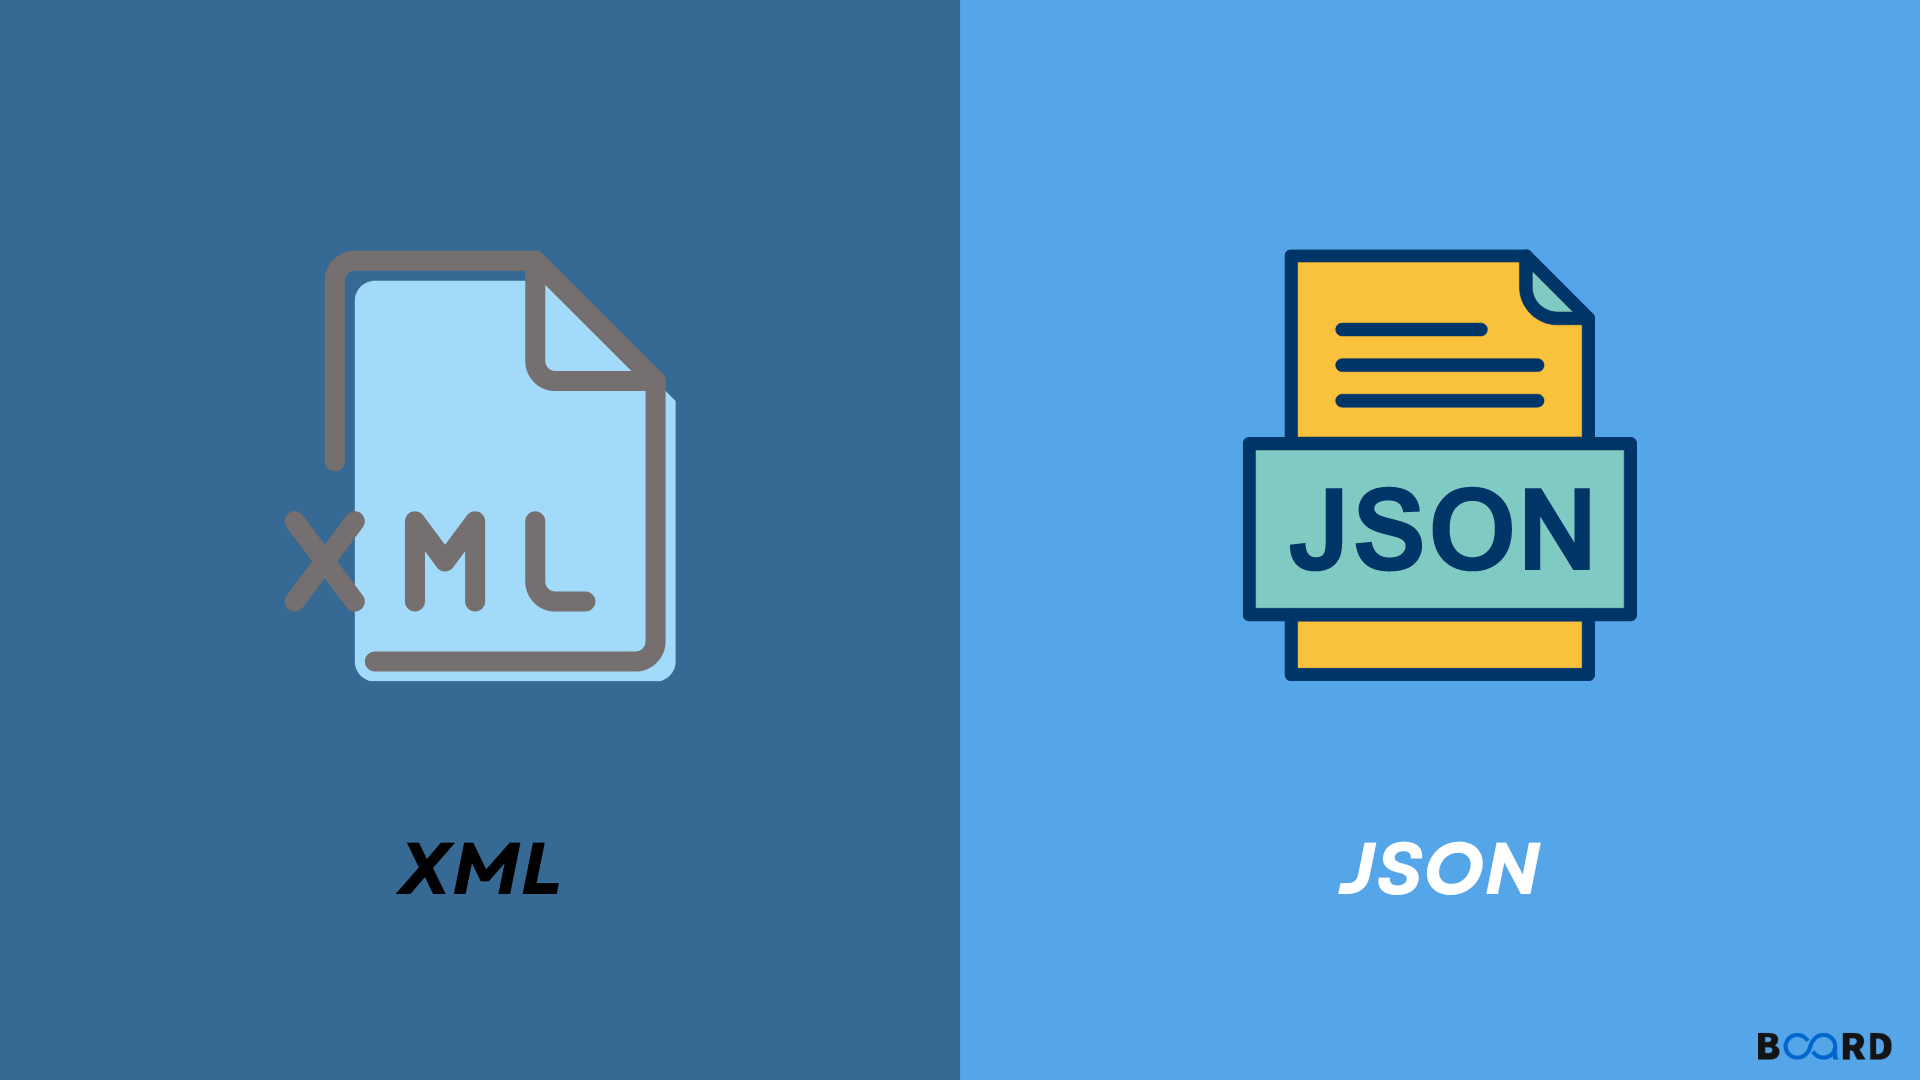 XML and JSON: Explanation and Differences